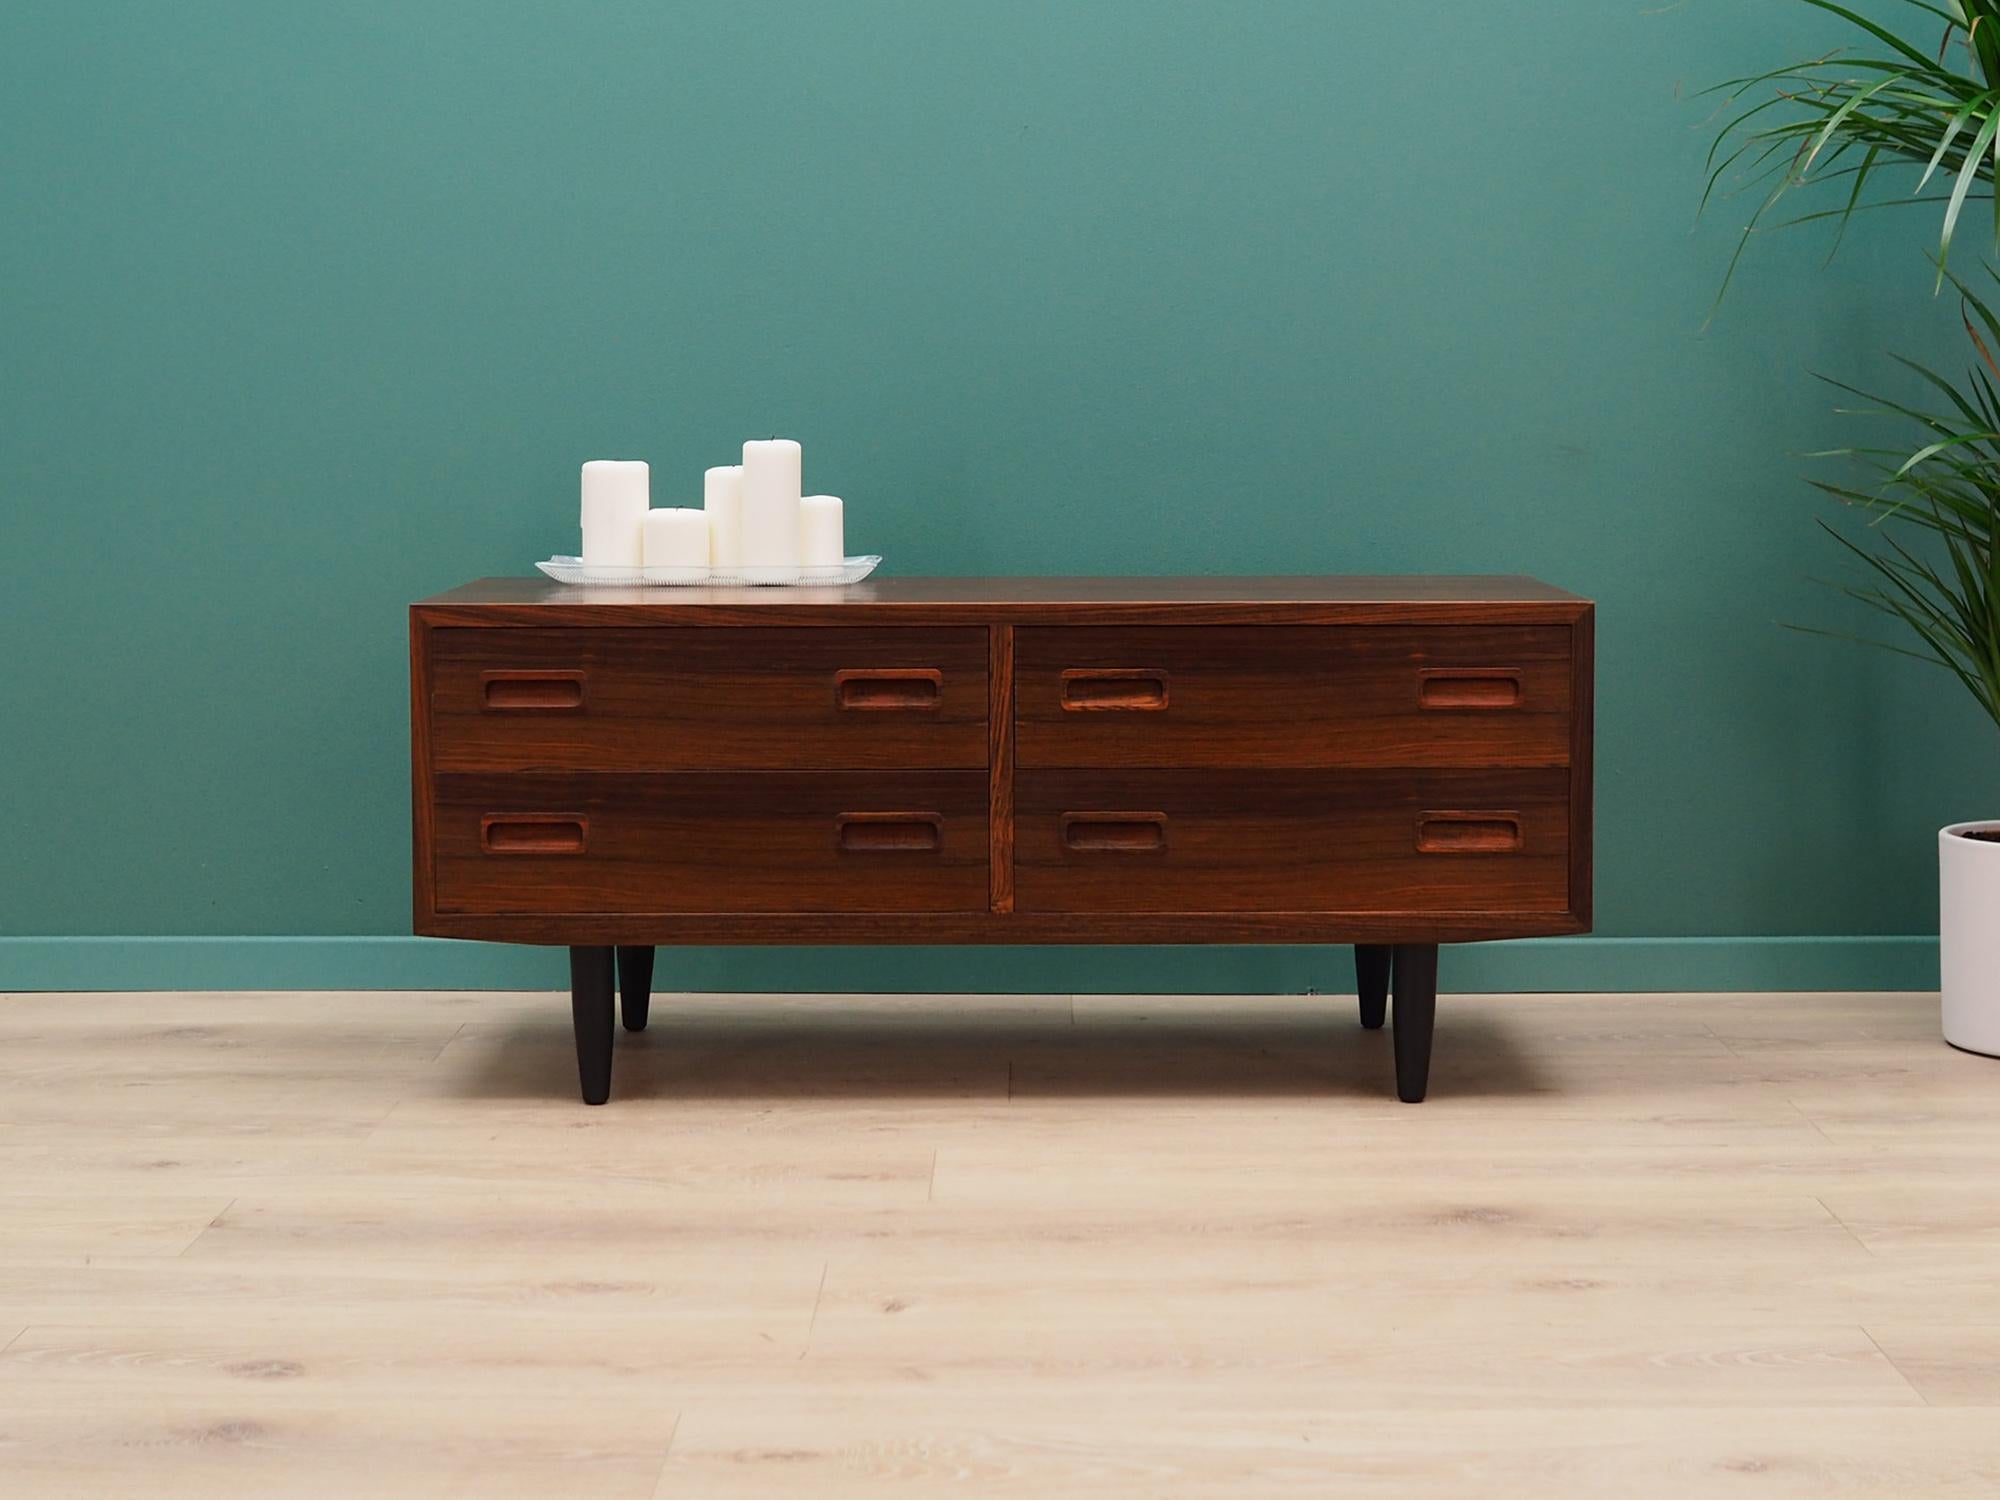 Superb chest of drawers from the 1960s-1970s. Danish design, Minimalist form. Manufactured by Hundevad & Co. Surface of the furniture finished with rosewood veneer. Furniture with four drawers. Preserved in good condition (minor bruises and